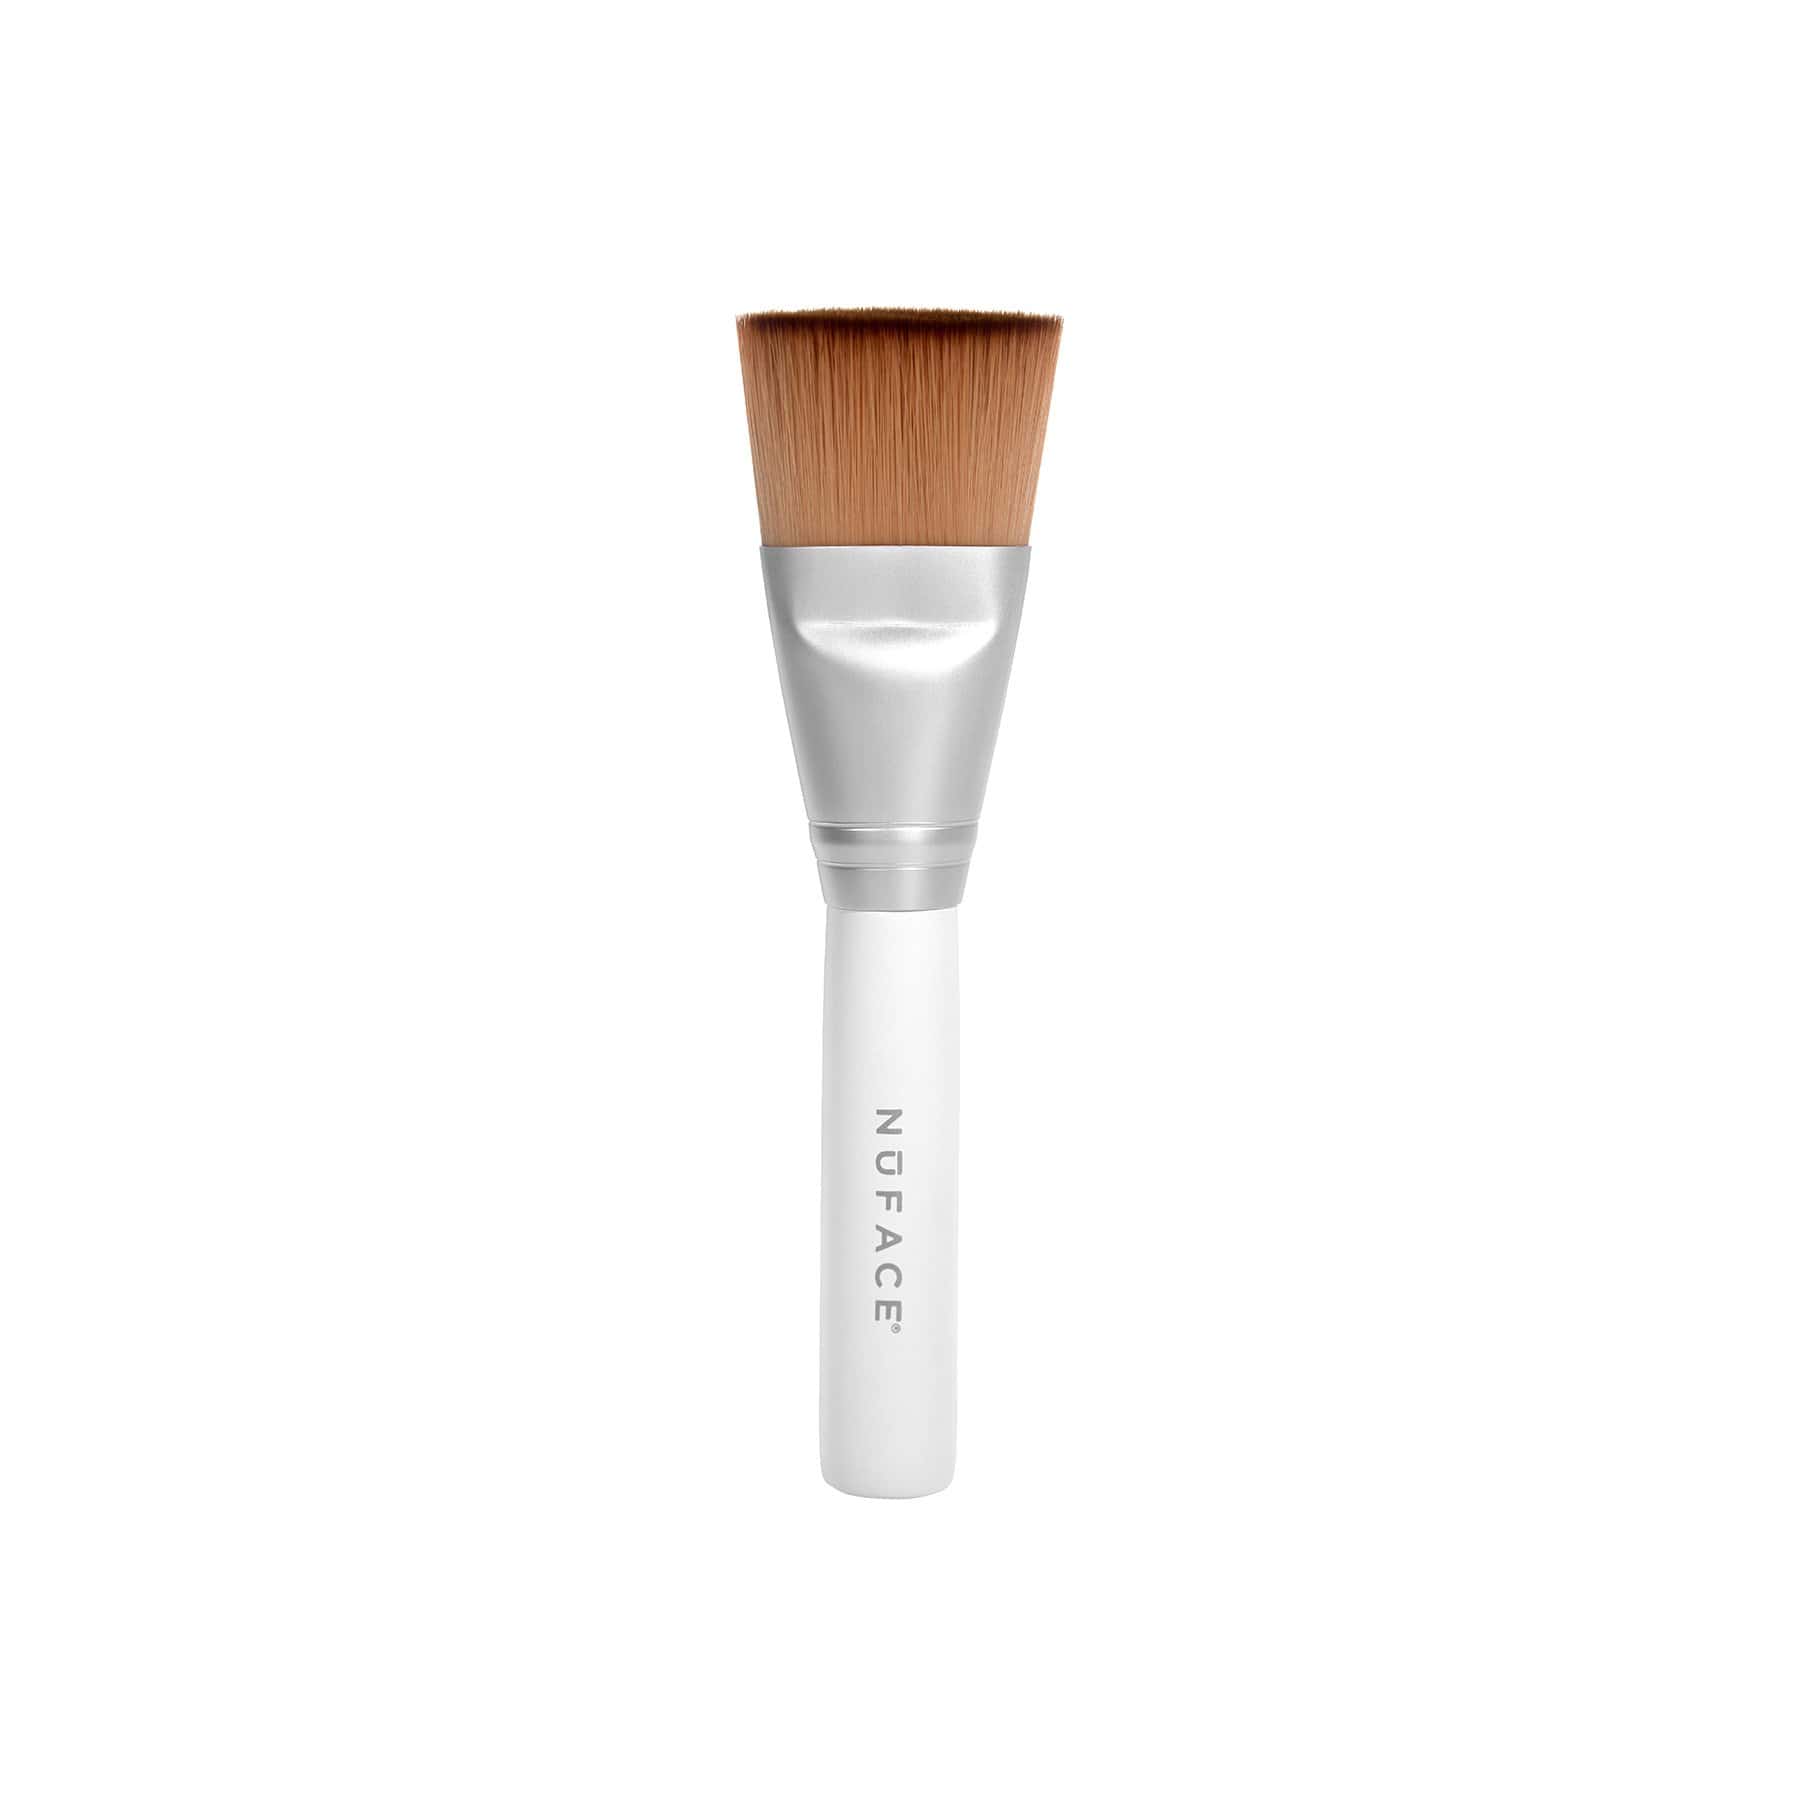 NuFACE Clean Sweep Applicator Brush.